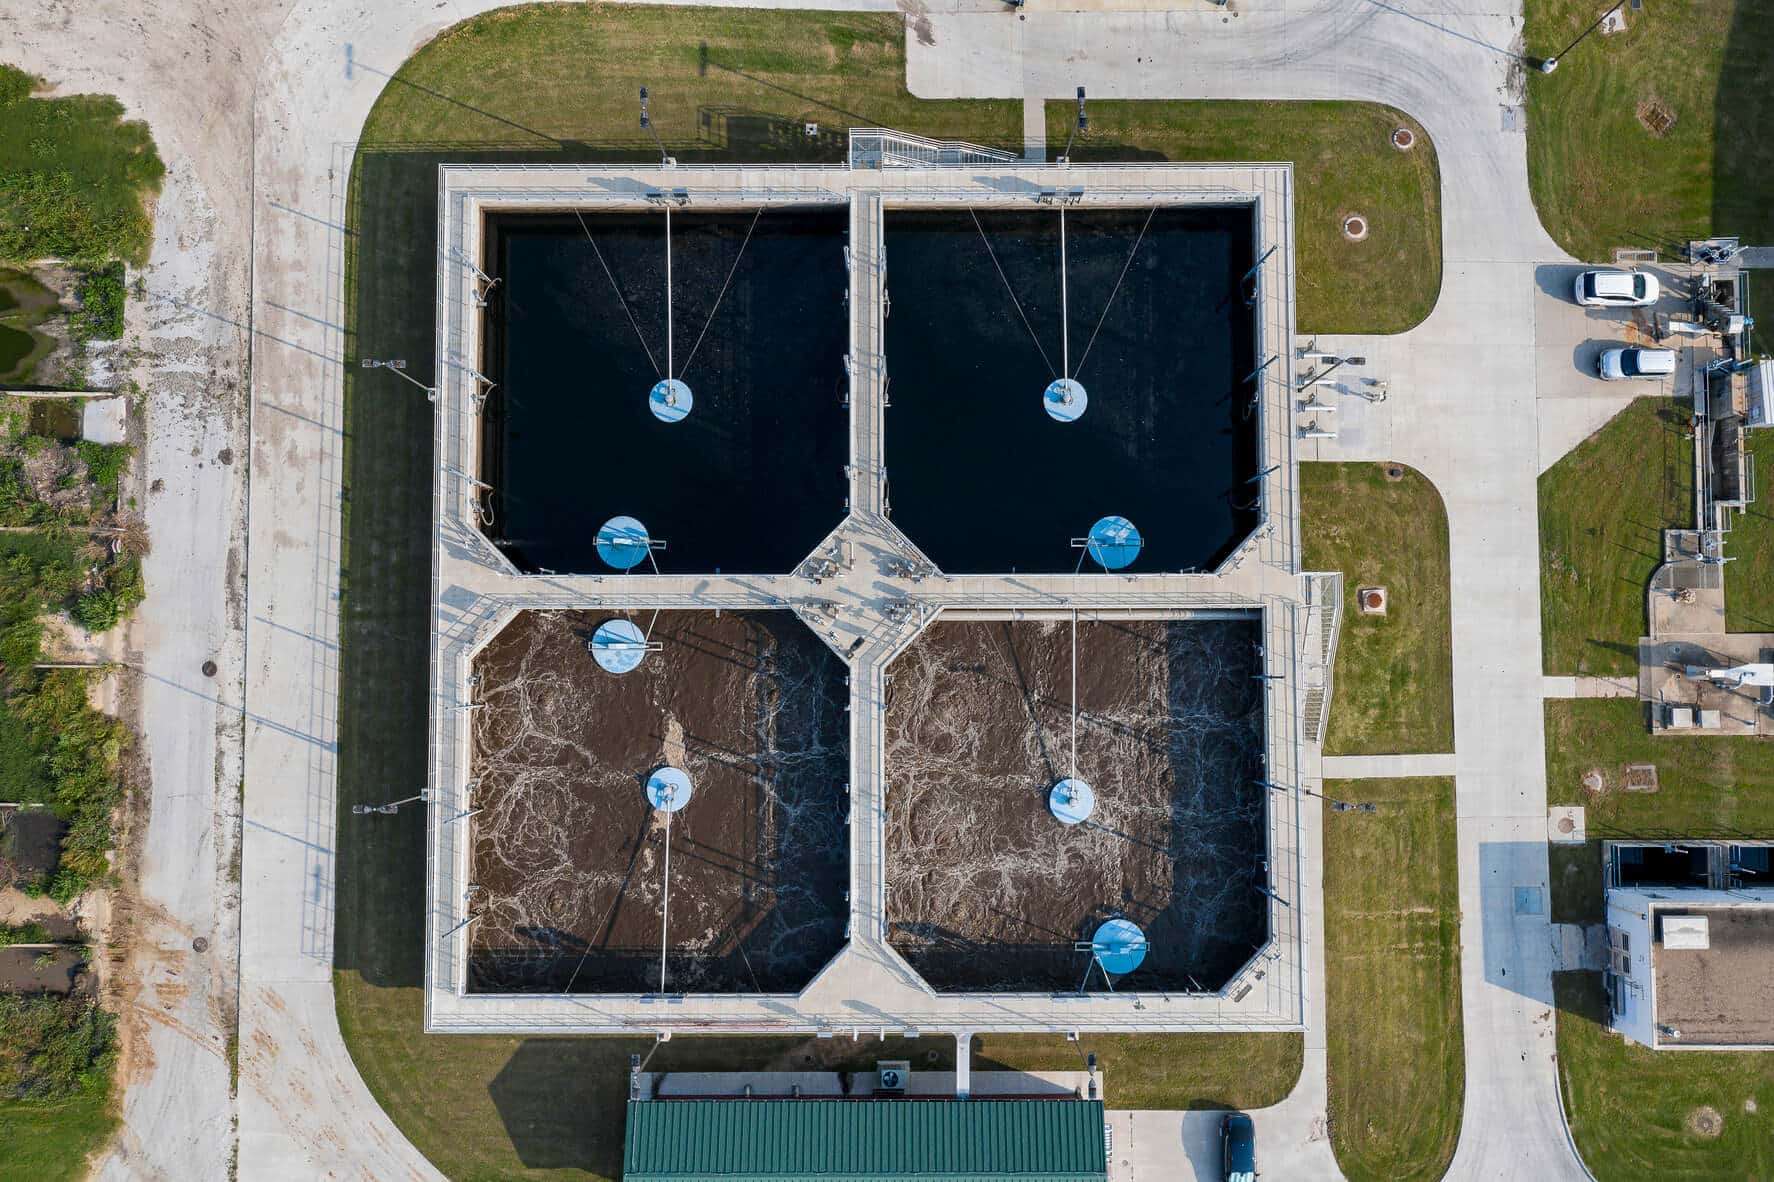 Gainesville Wastewater Treatment Plant Aerial